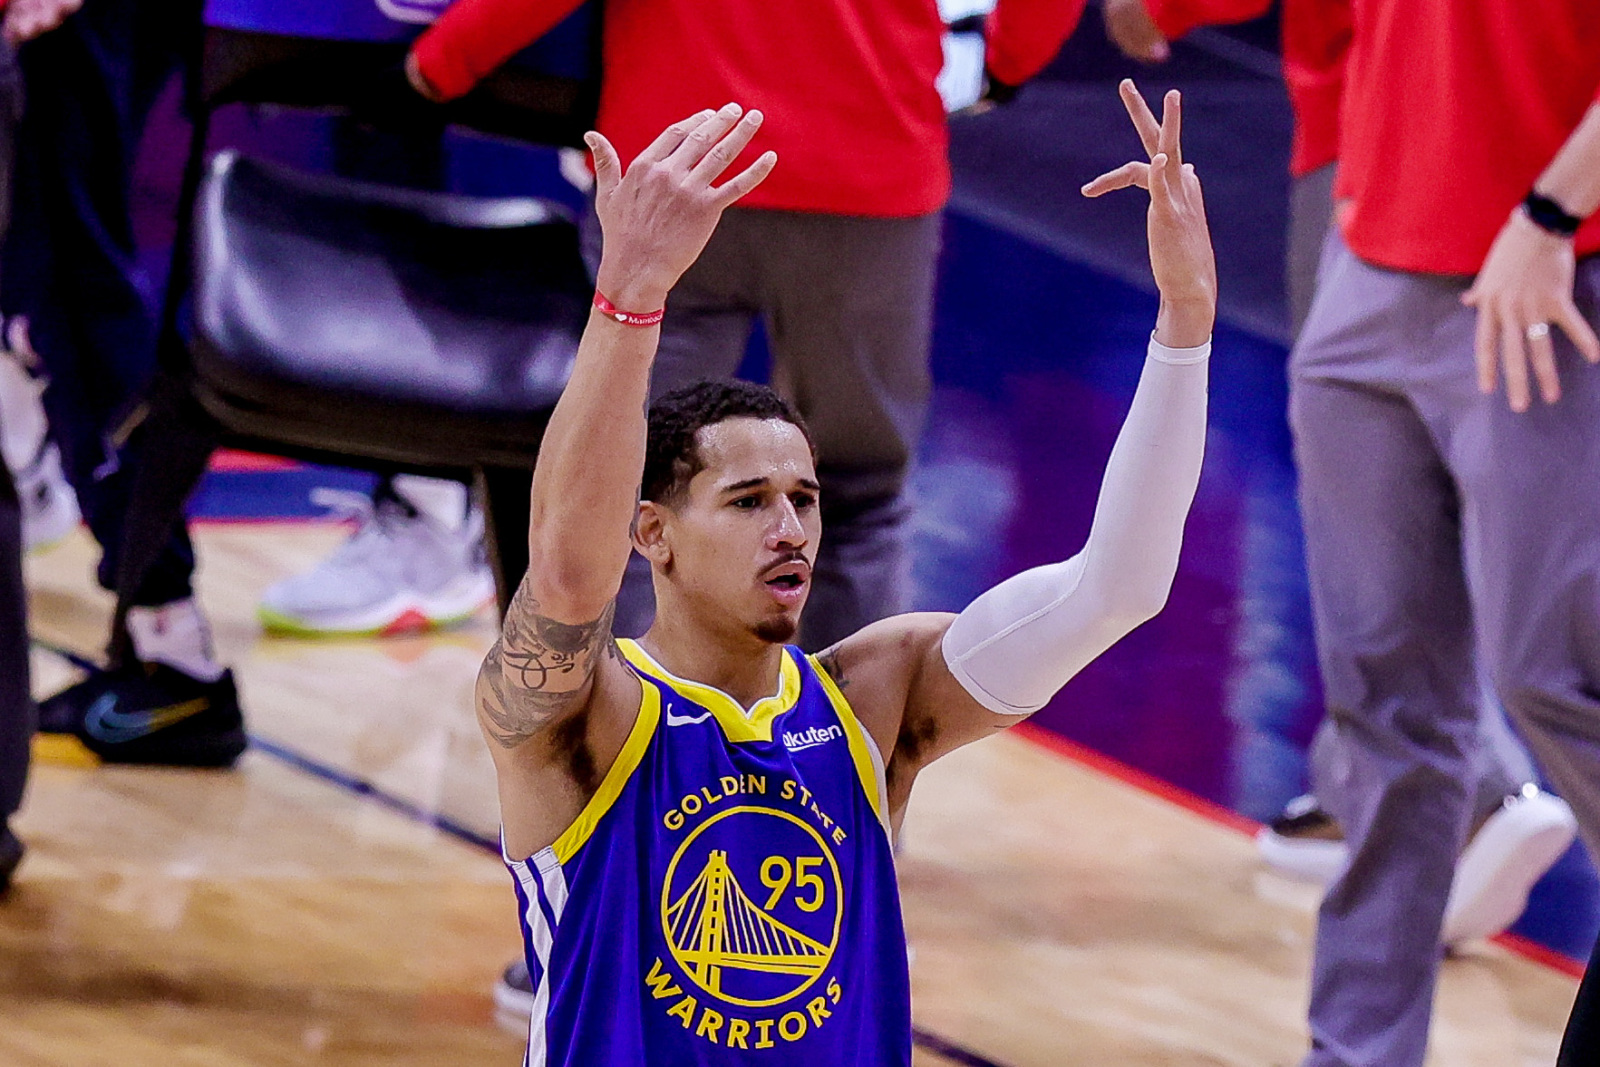 Report: Warriors' Juan Toscano-Anderson to compete in NBA dunk contest